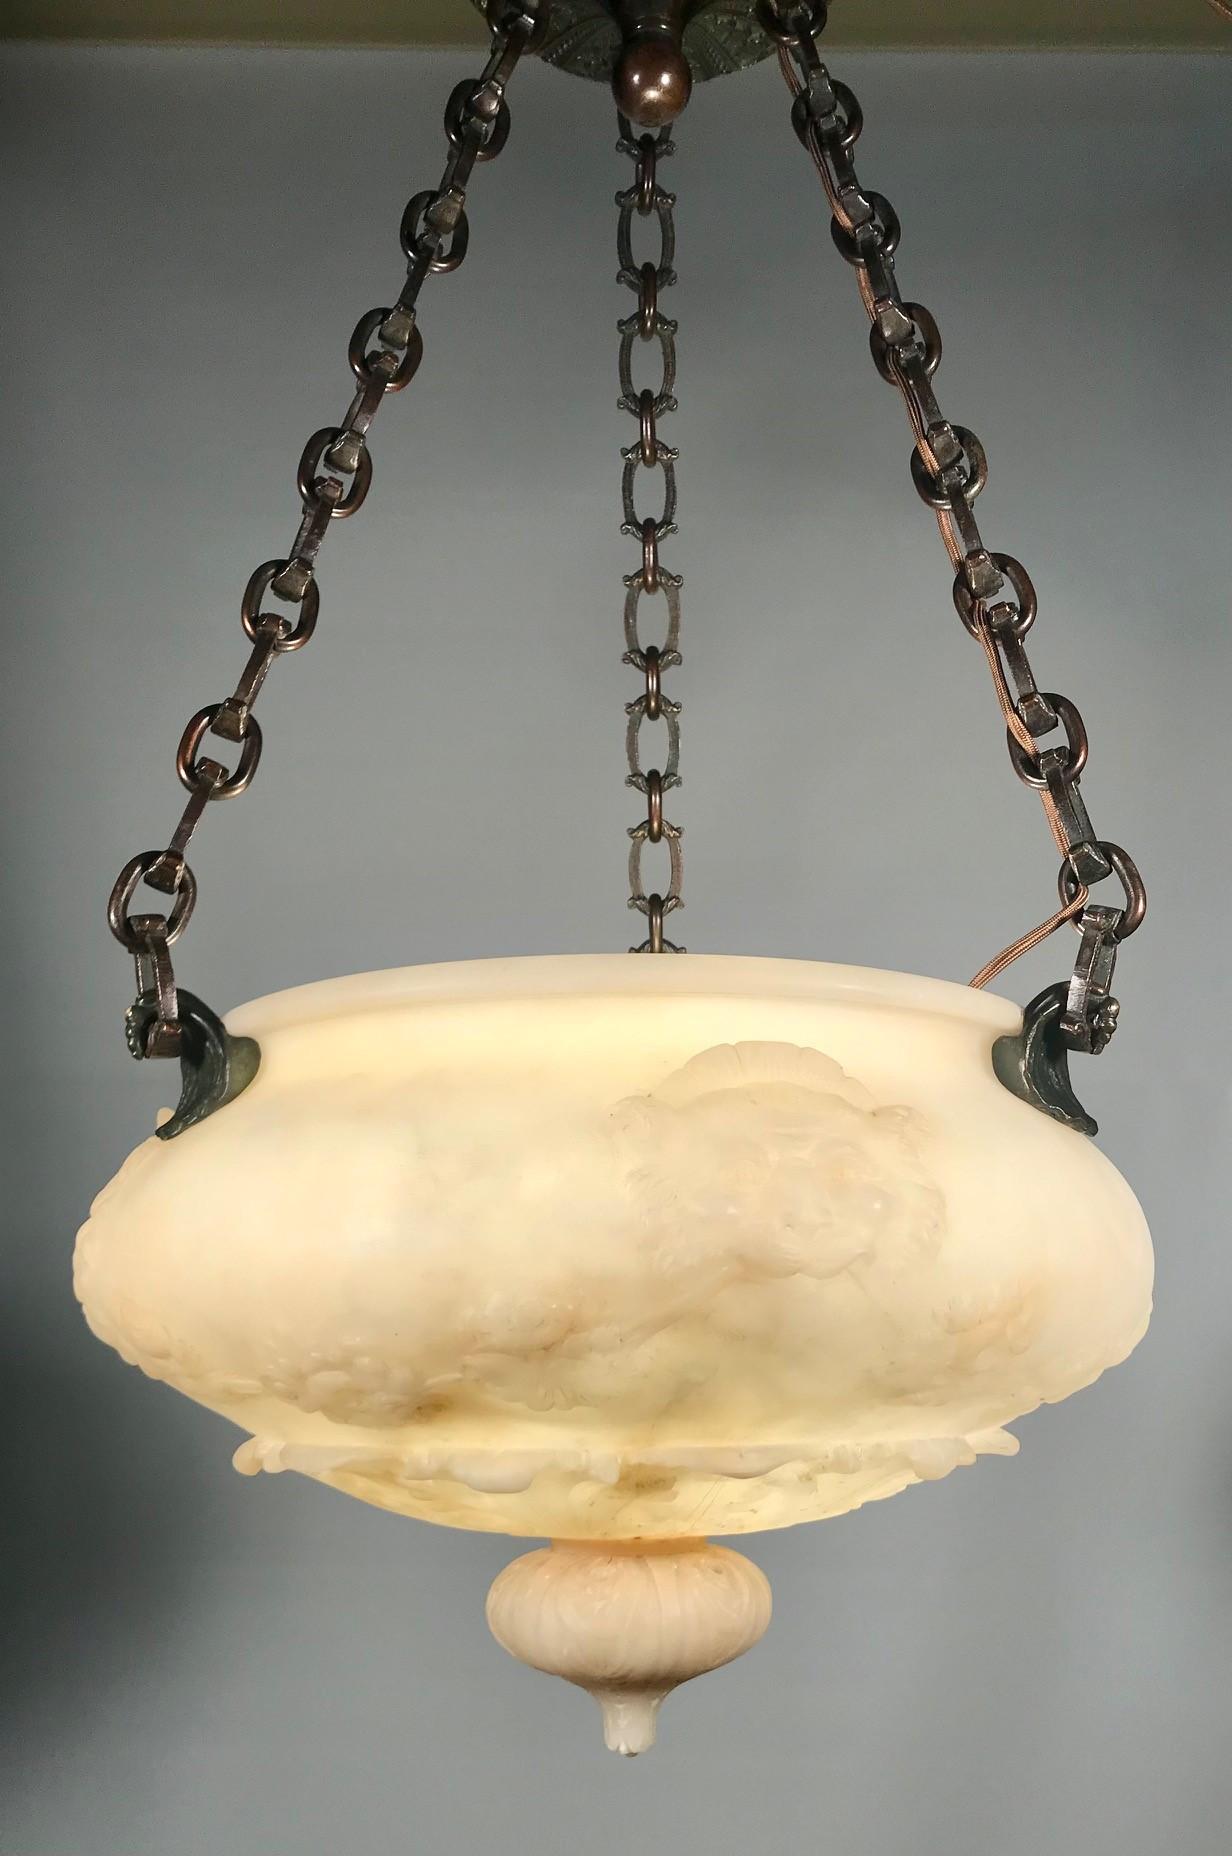 This alabaster bowl shaped fixture is carved on the sides with stylised lions and underneath with stylized acanthus. The mounting bronze hooks are modelled as fierce birds-of-prey. 

Much is made of the chain and canopy. The chain is heavy, finely